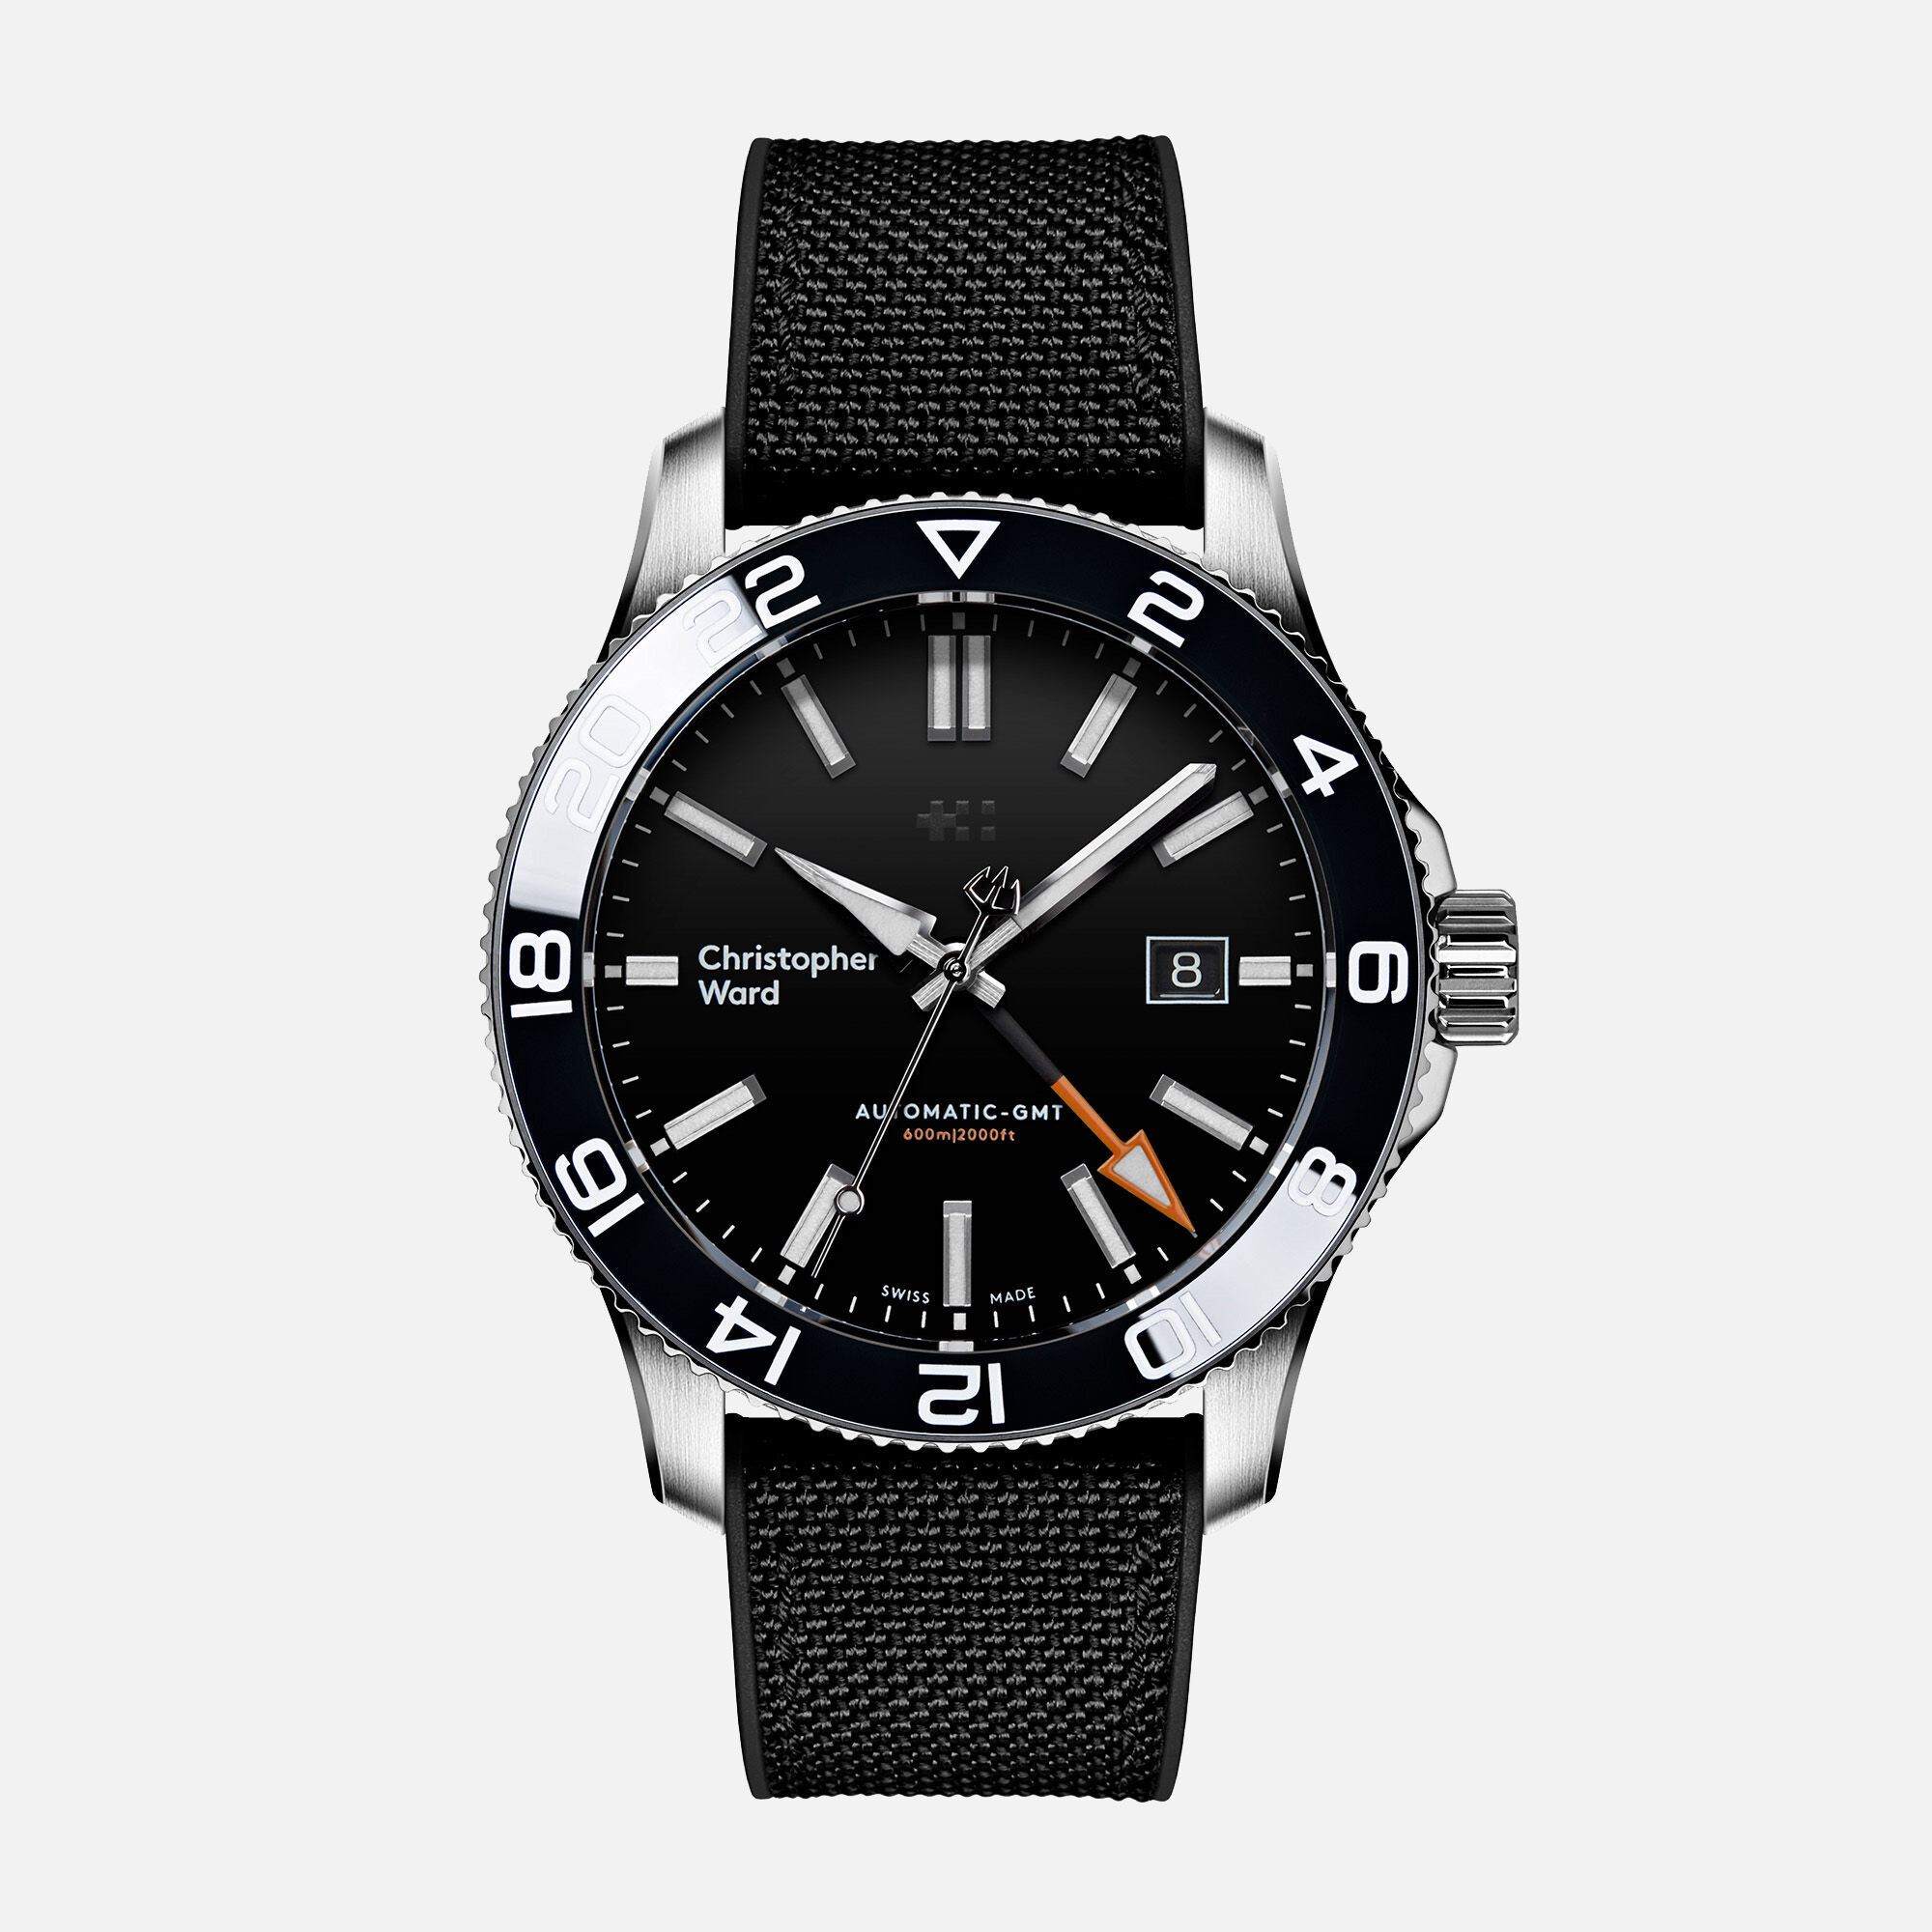 ward - Christopher Ward C60 Trident GMT  - Page 3 C60-42AGM3-S0KK0-HK_Picture_1